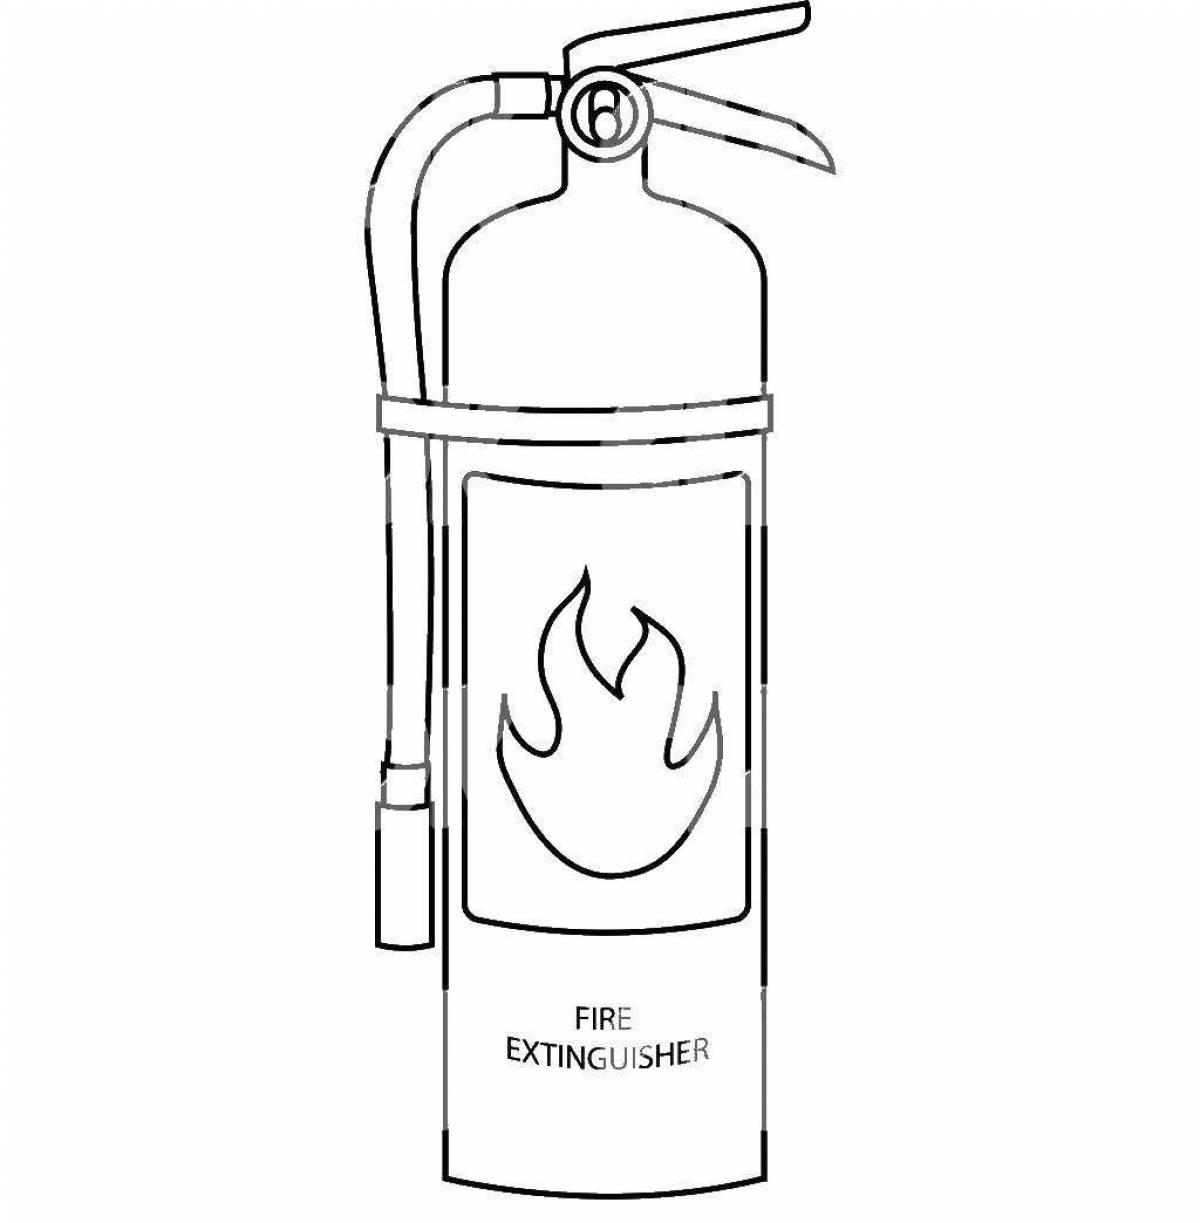 Magic fire extinguisher coloring page for kids